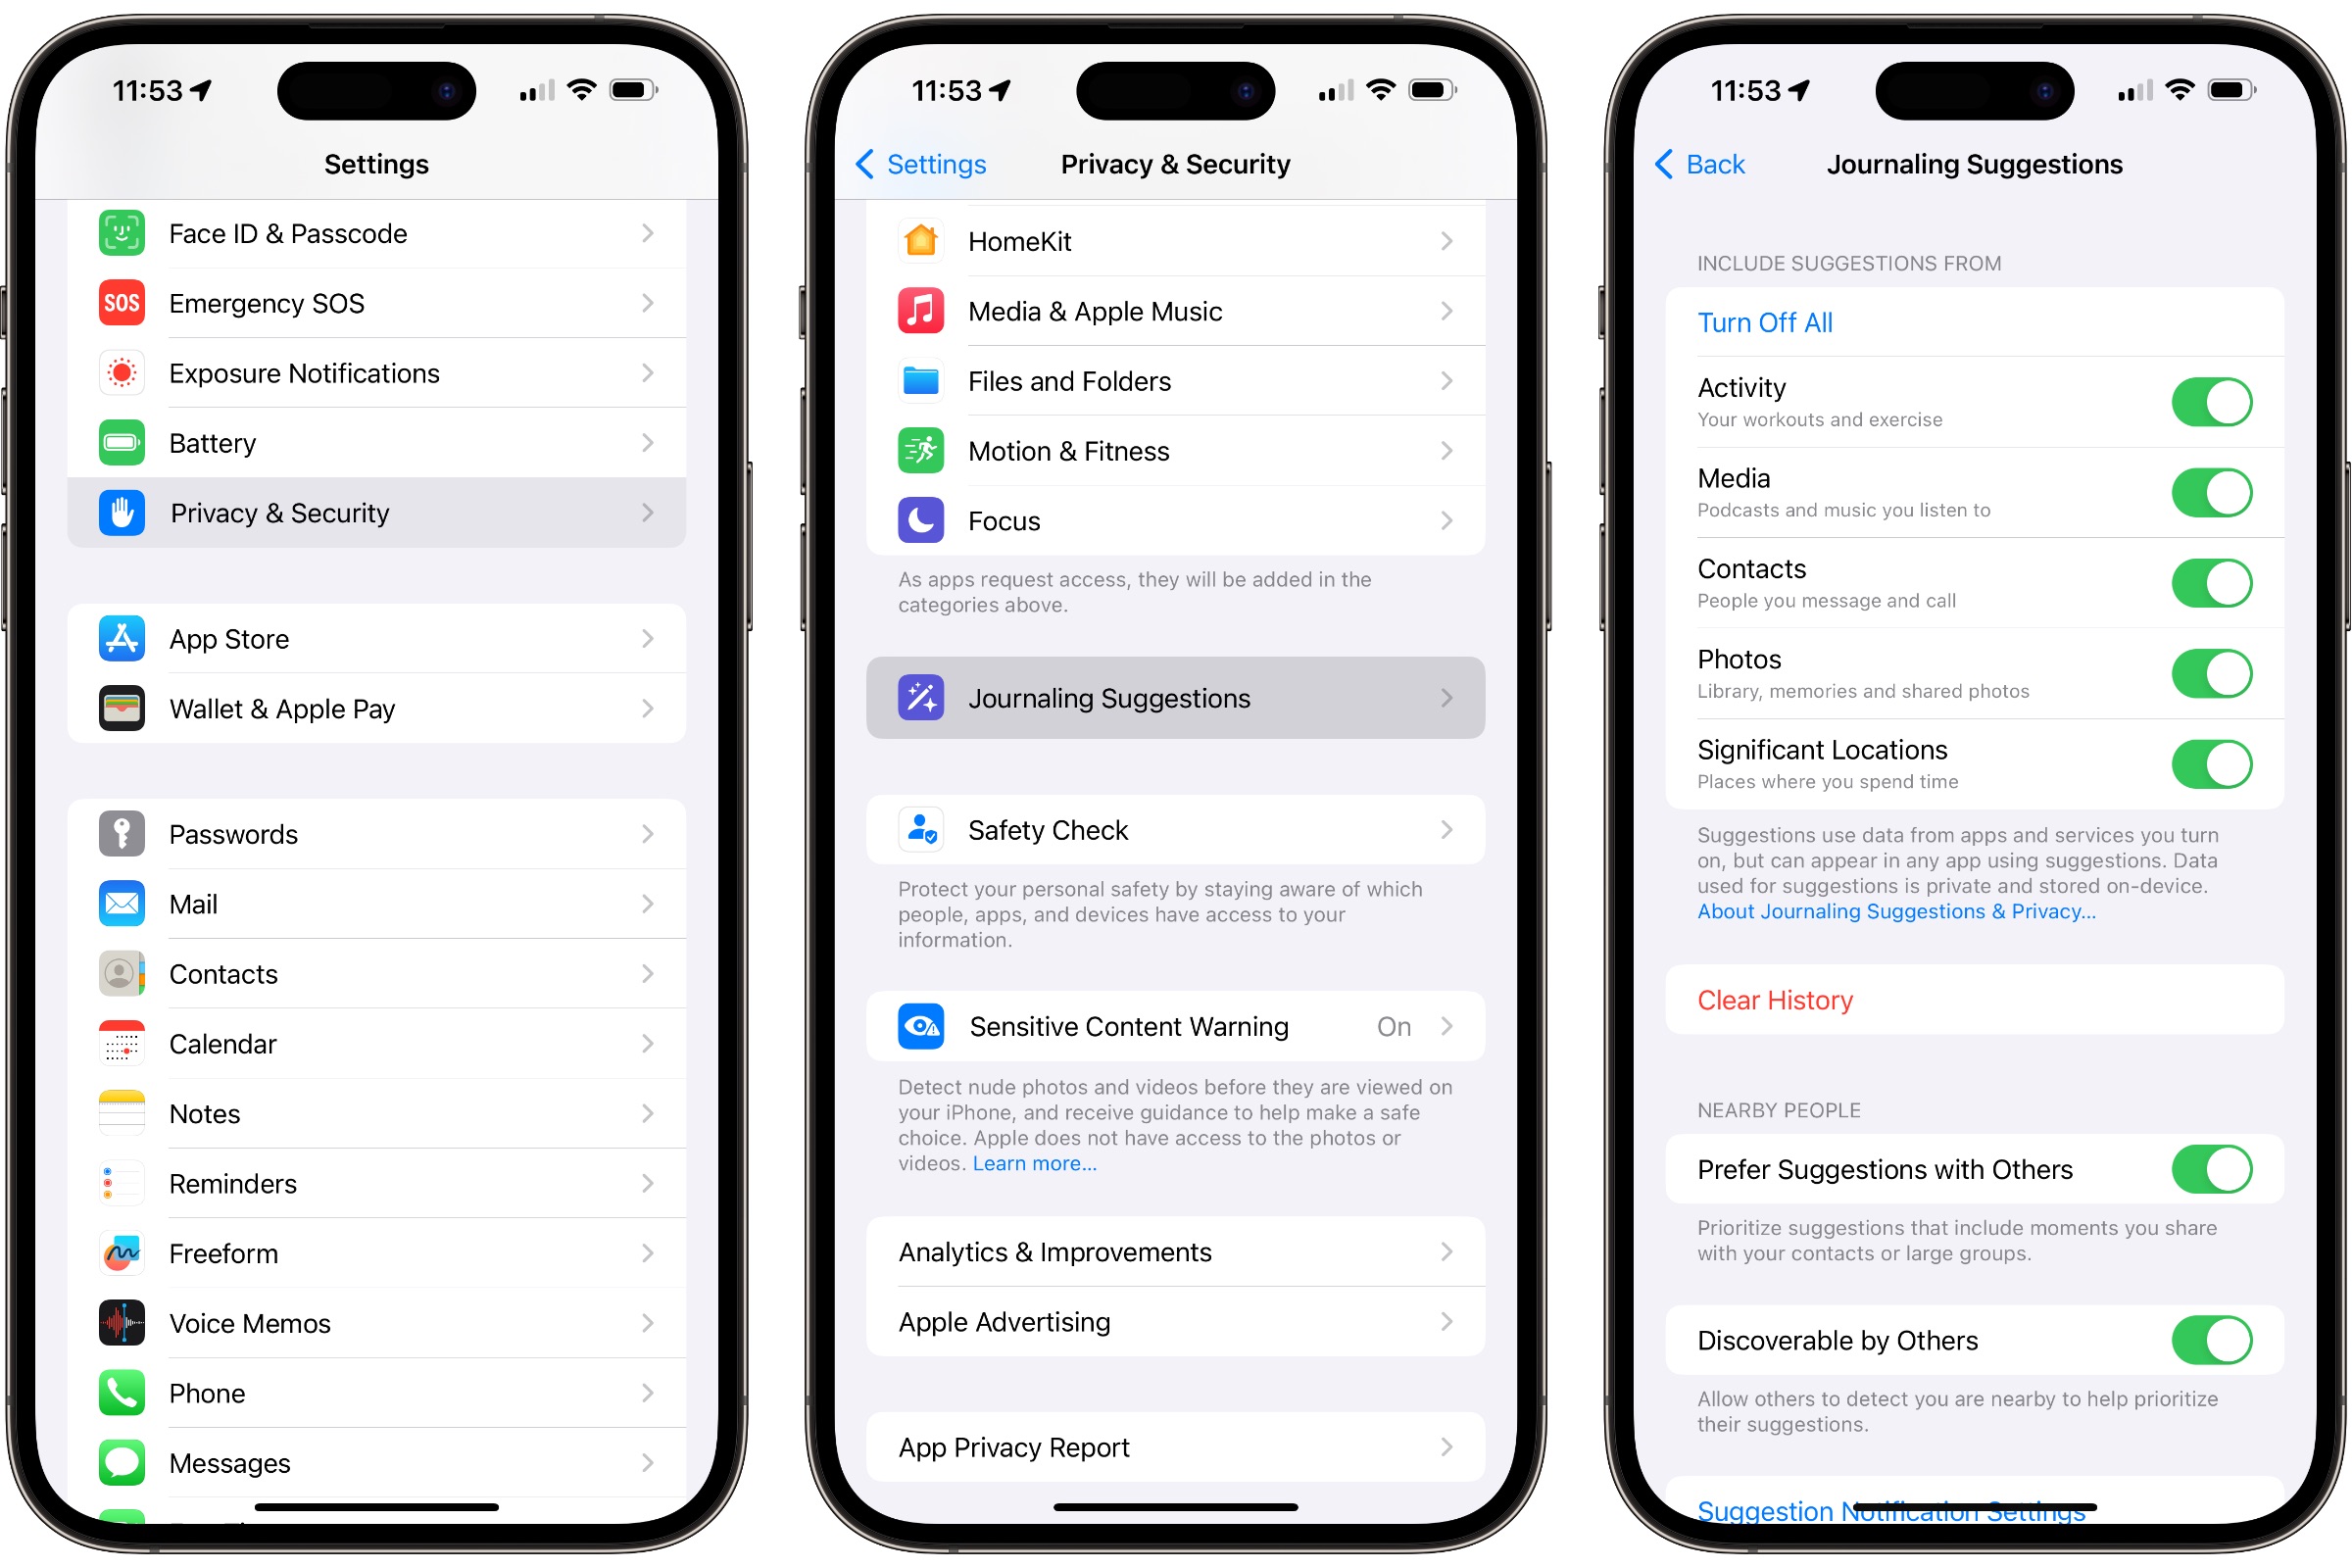 Journal Suggestions privacy settings in iOS 17.2.